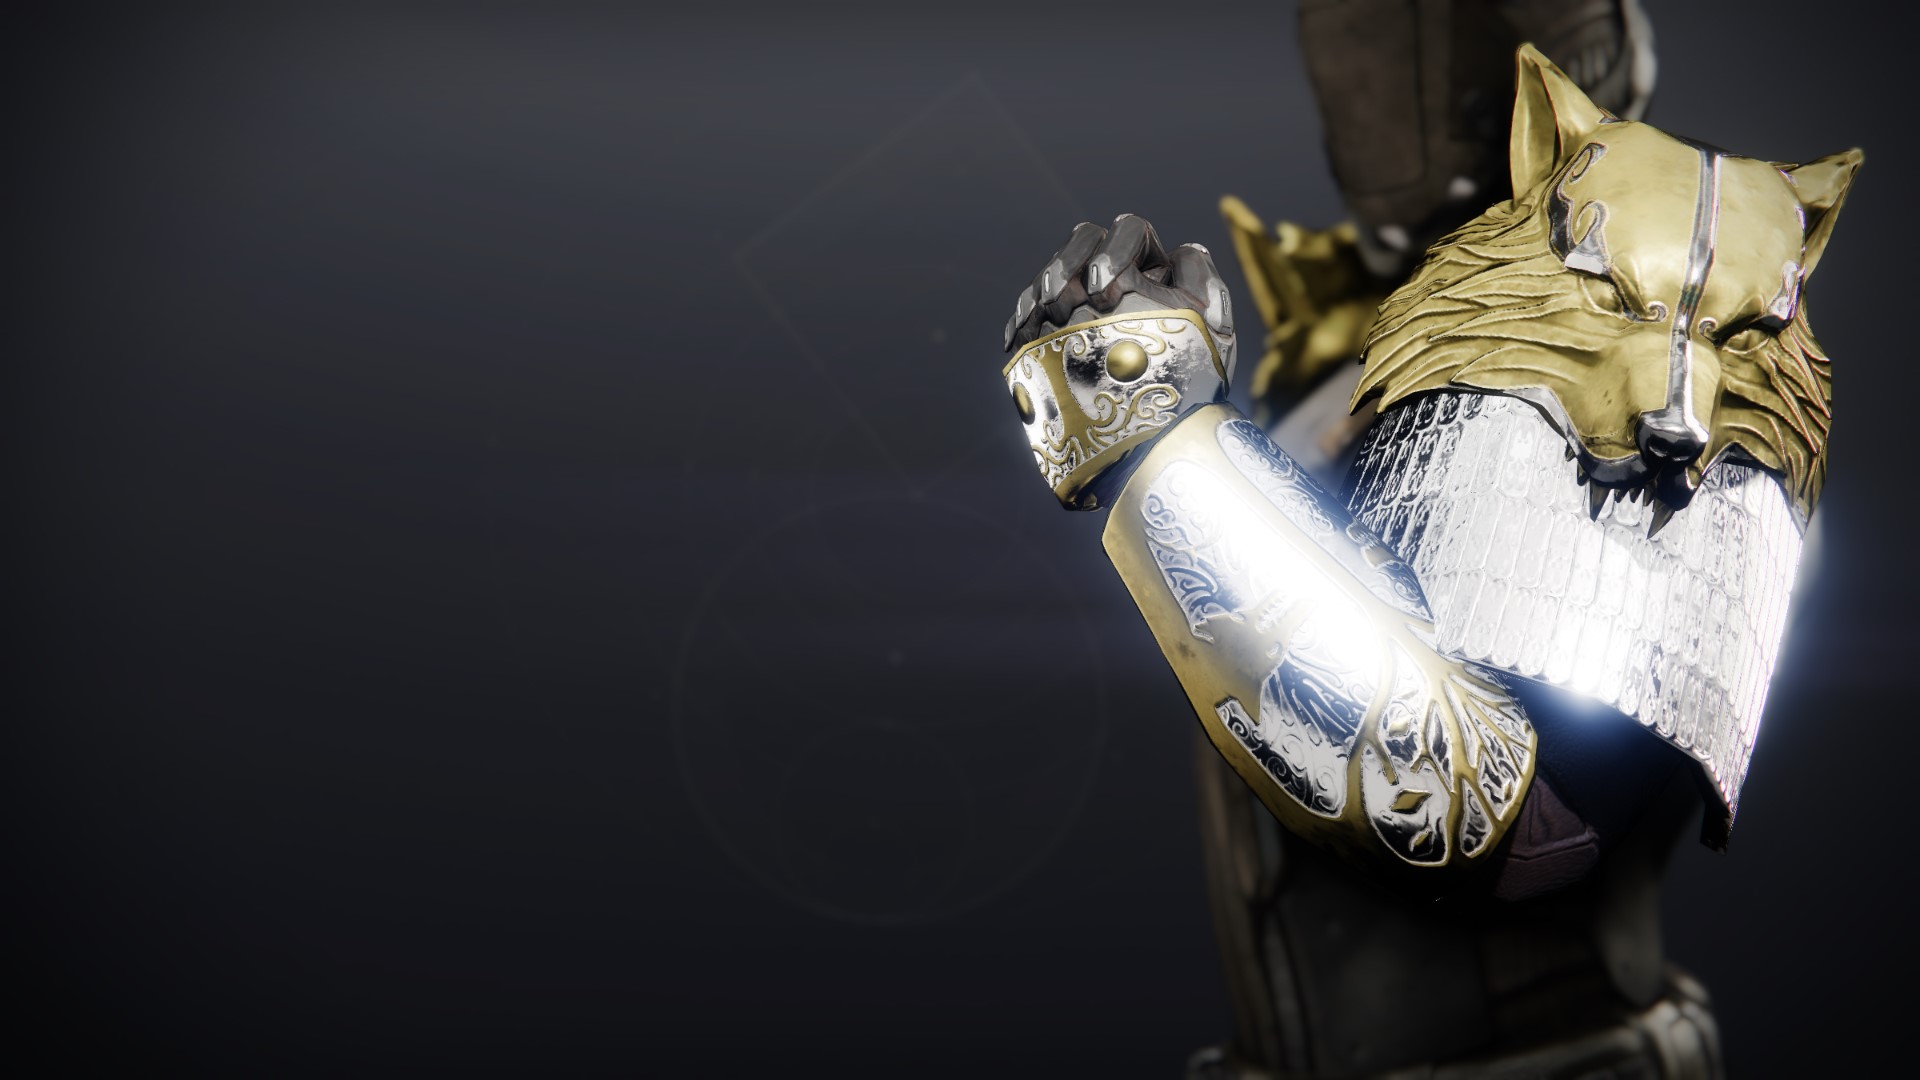 An in-game render of the Iron Truage Gauntlets.